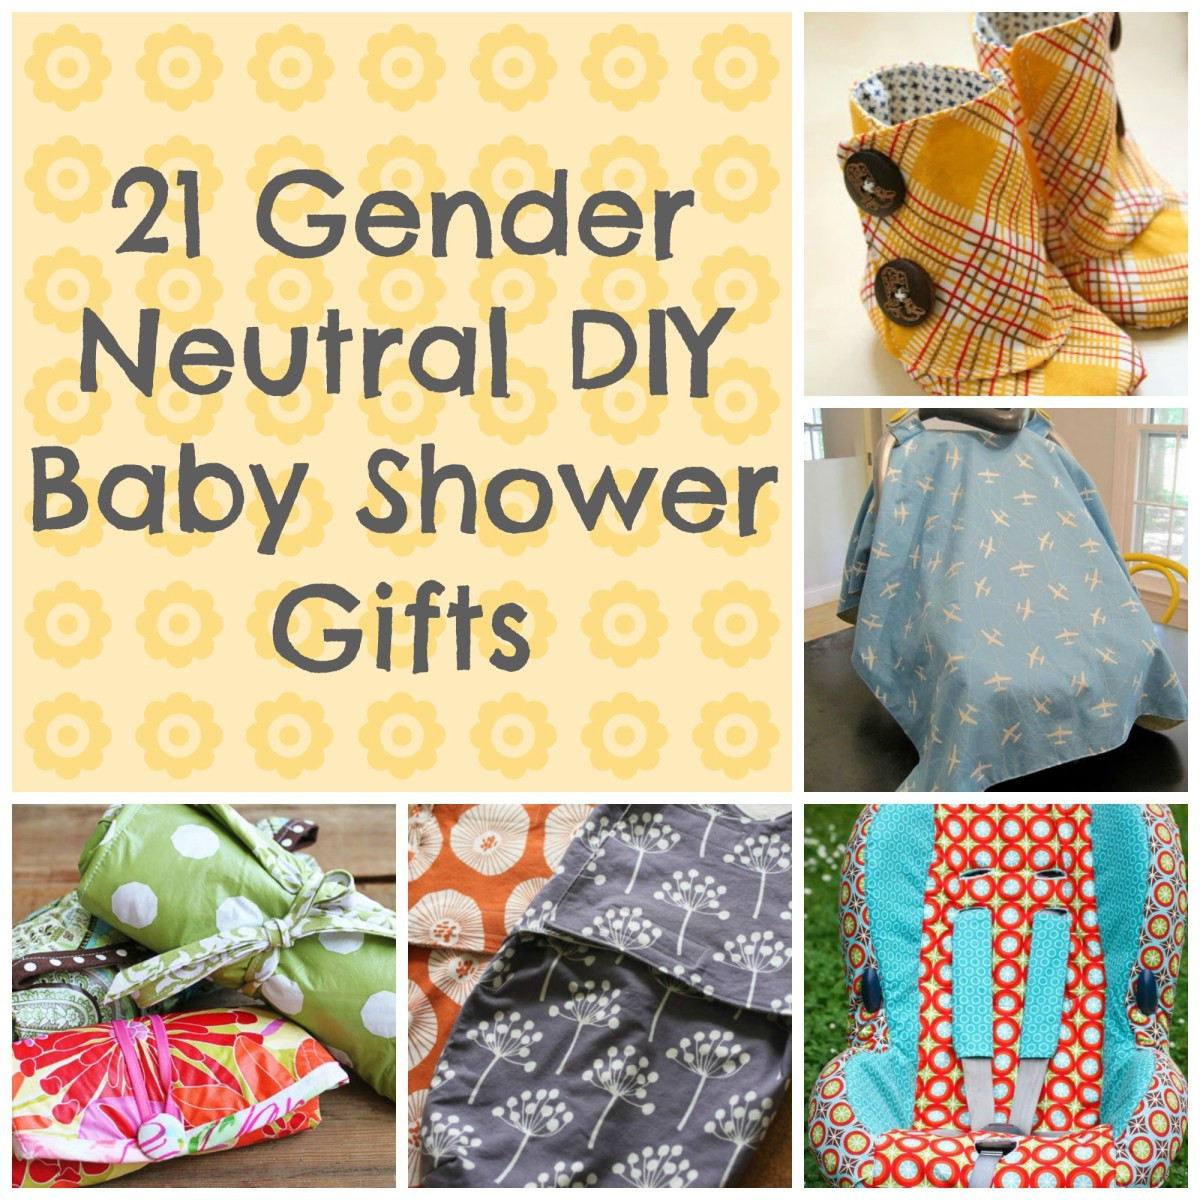 Neutral Baby Gift Ideas
 21 Awesome DIY Baby Shower Gift Ideas That Are Gender Neutral